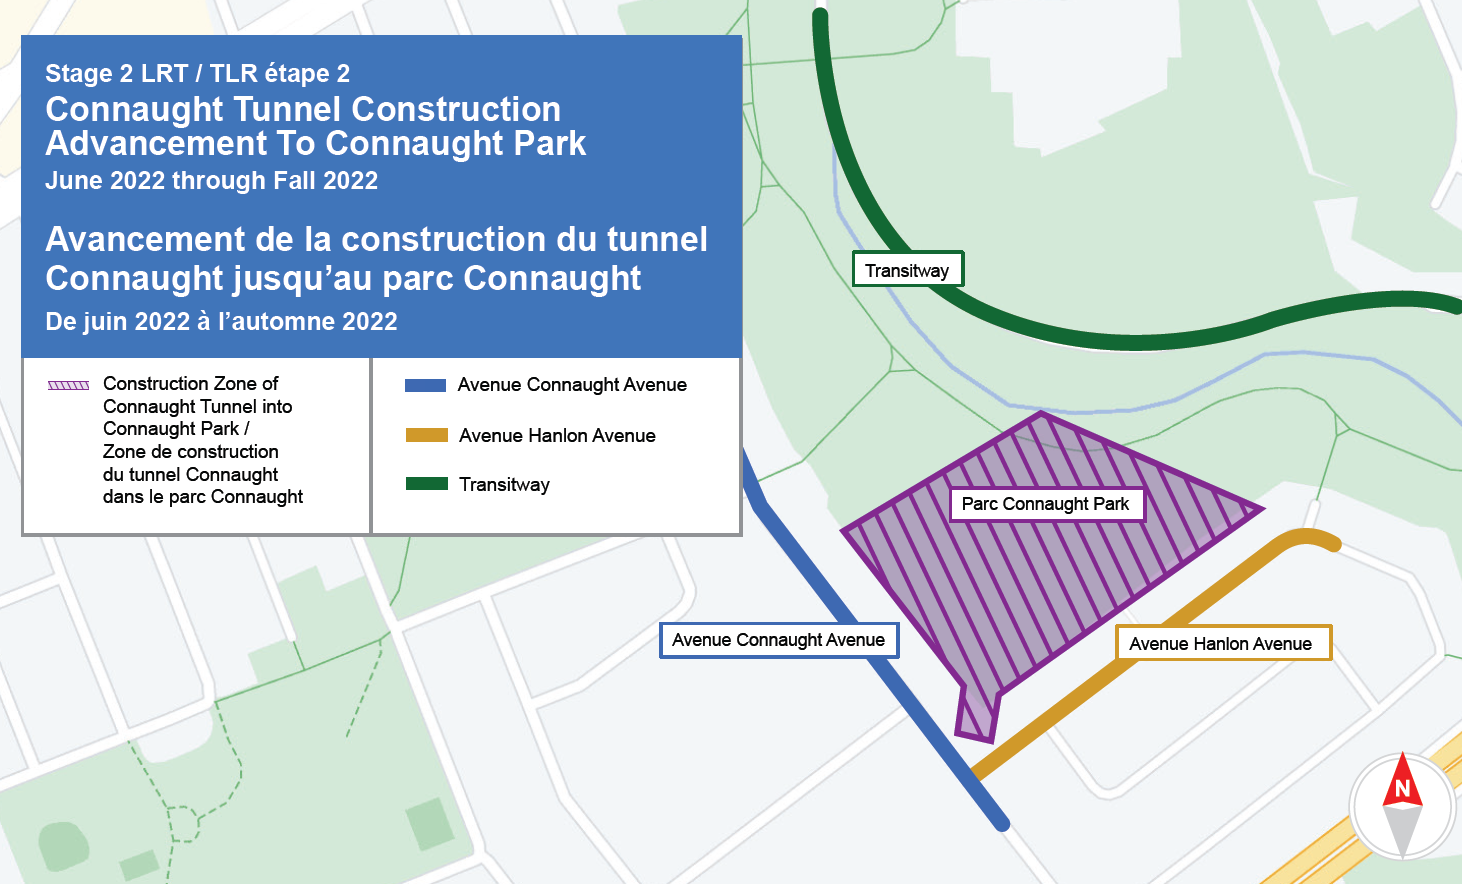 Graphic of Connaught Park and contractor workzone in Connaught park.